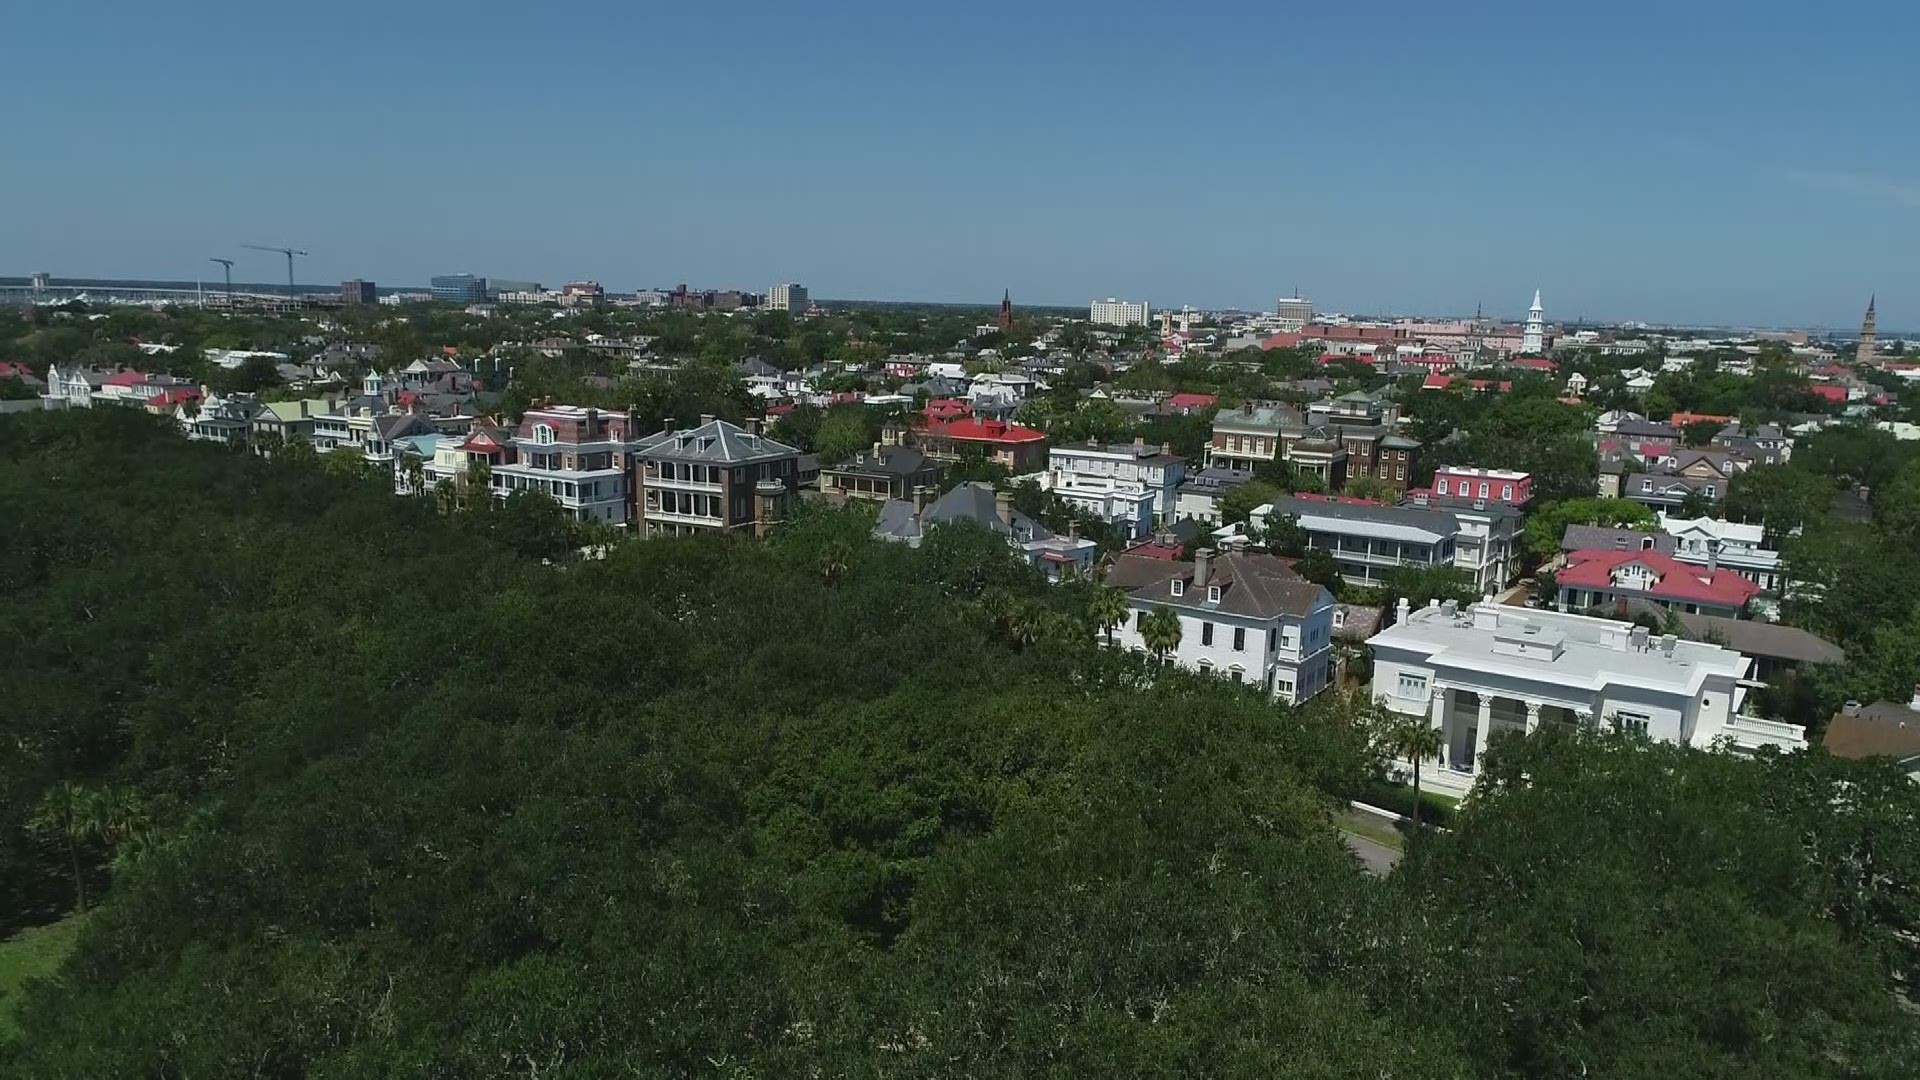 The News 19 Drone shows what Downtown Charleston looked like a day after Hurricane Dorian stormed through the area.